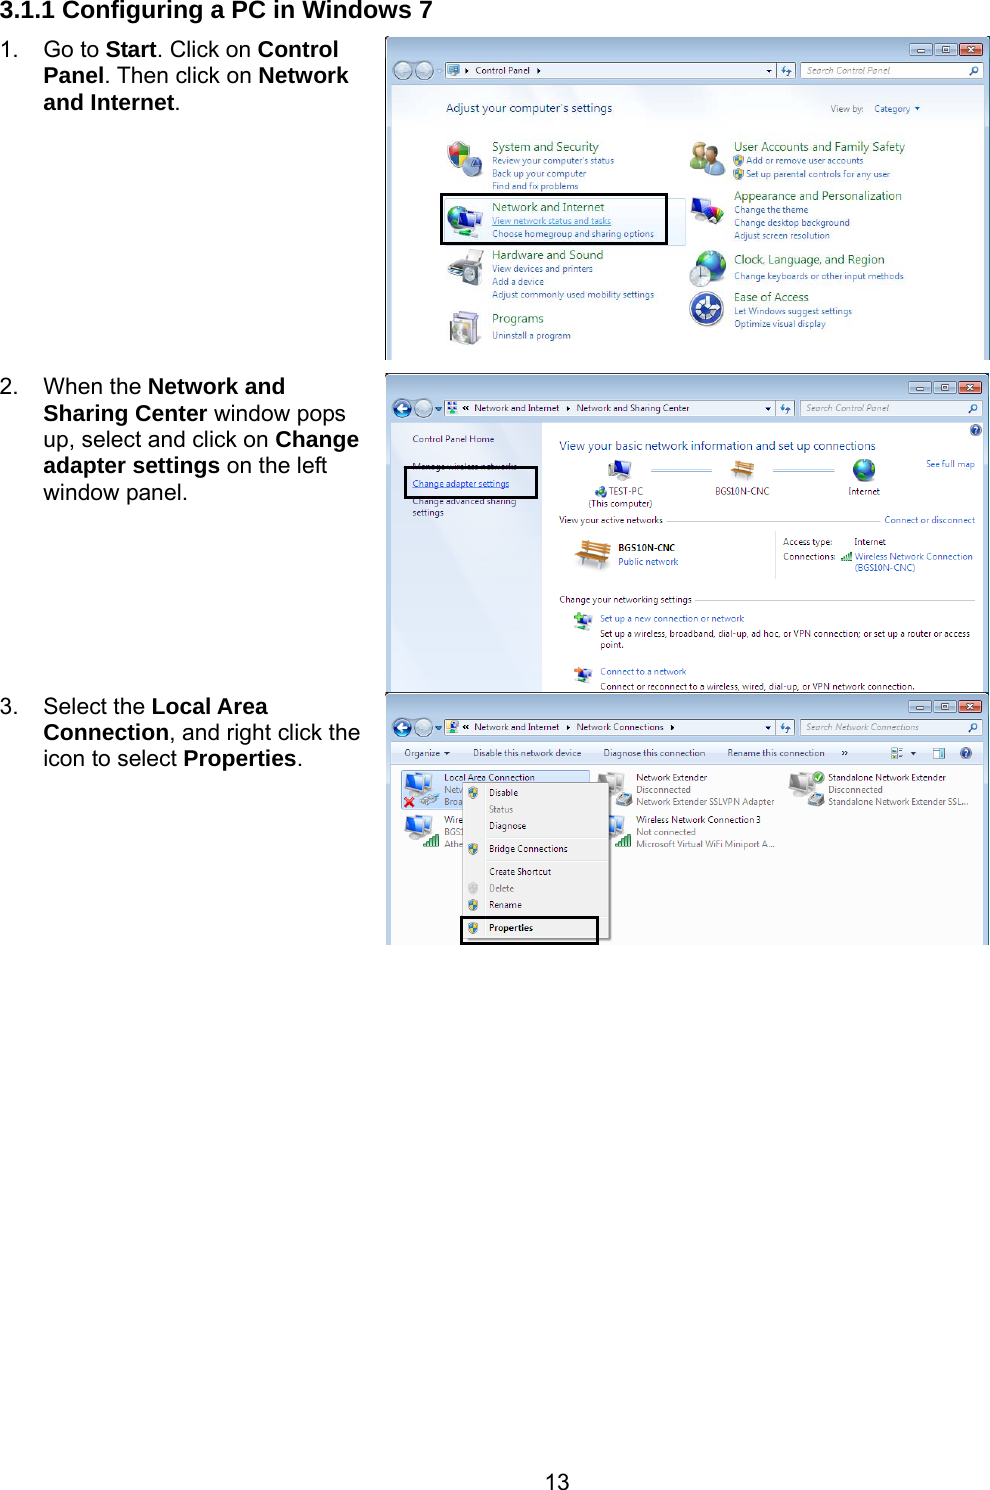 13 3.1.1 Configuring a PC in Windows 7 1. Go to Start. Click on Control Panel. Then click on Network and Internet. 2. When the Network and Sharing Center window pops up, select and click on Change adapter settings on the left window panel. 3. Select the Local Area Connection, and right click the icon to select Properties.  